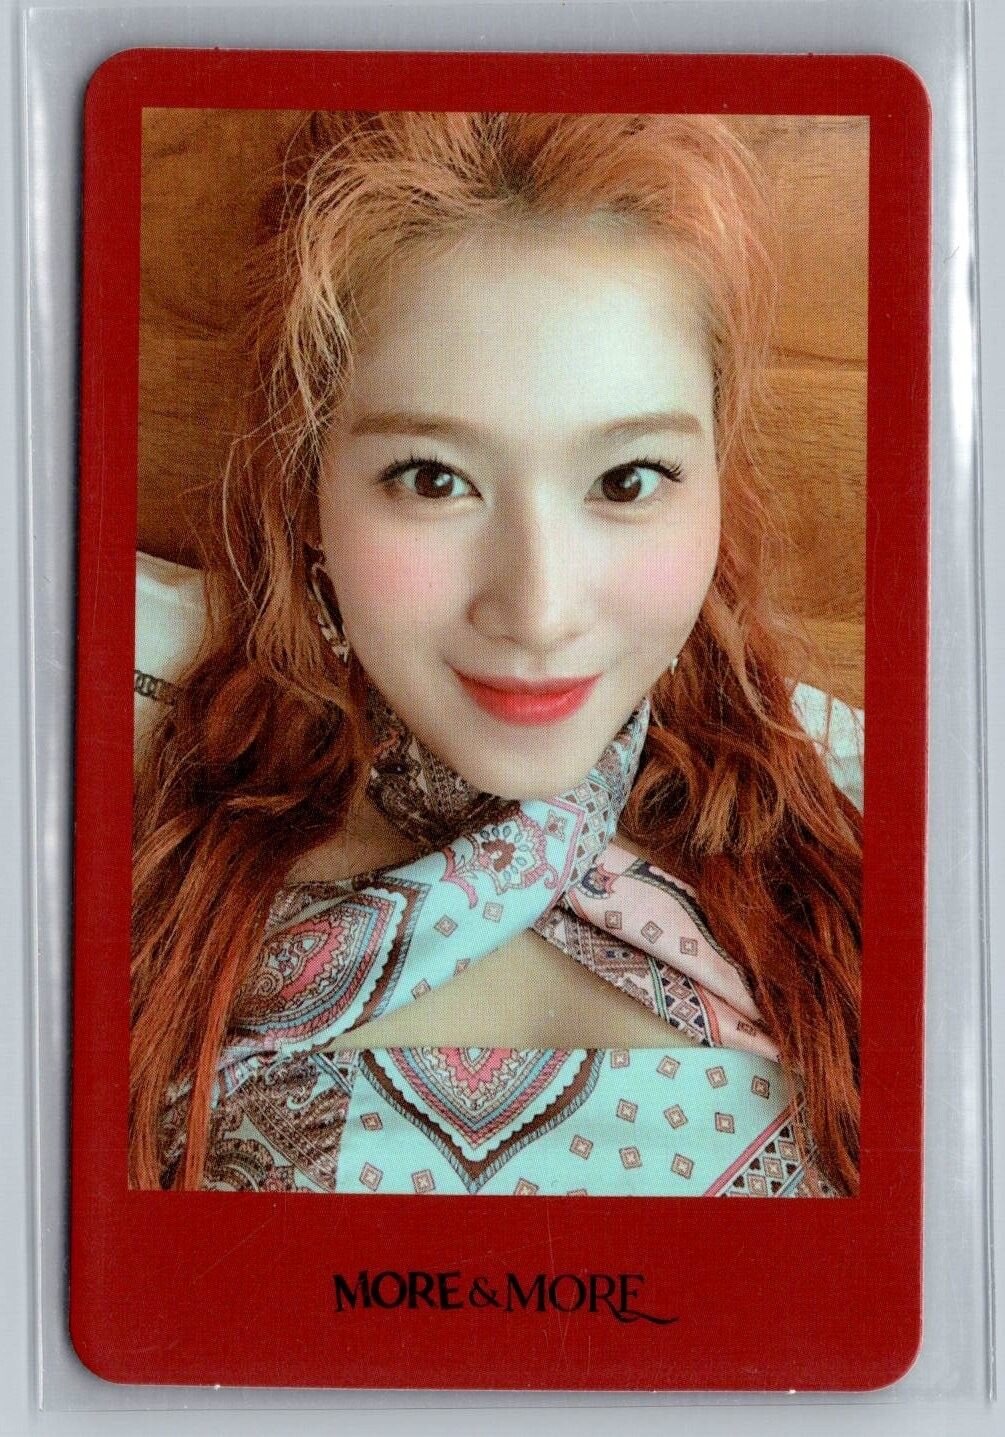 TWICE- SANA MORE & MORE OFFICIAL PHOTOCARD (US SELLER)